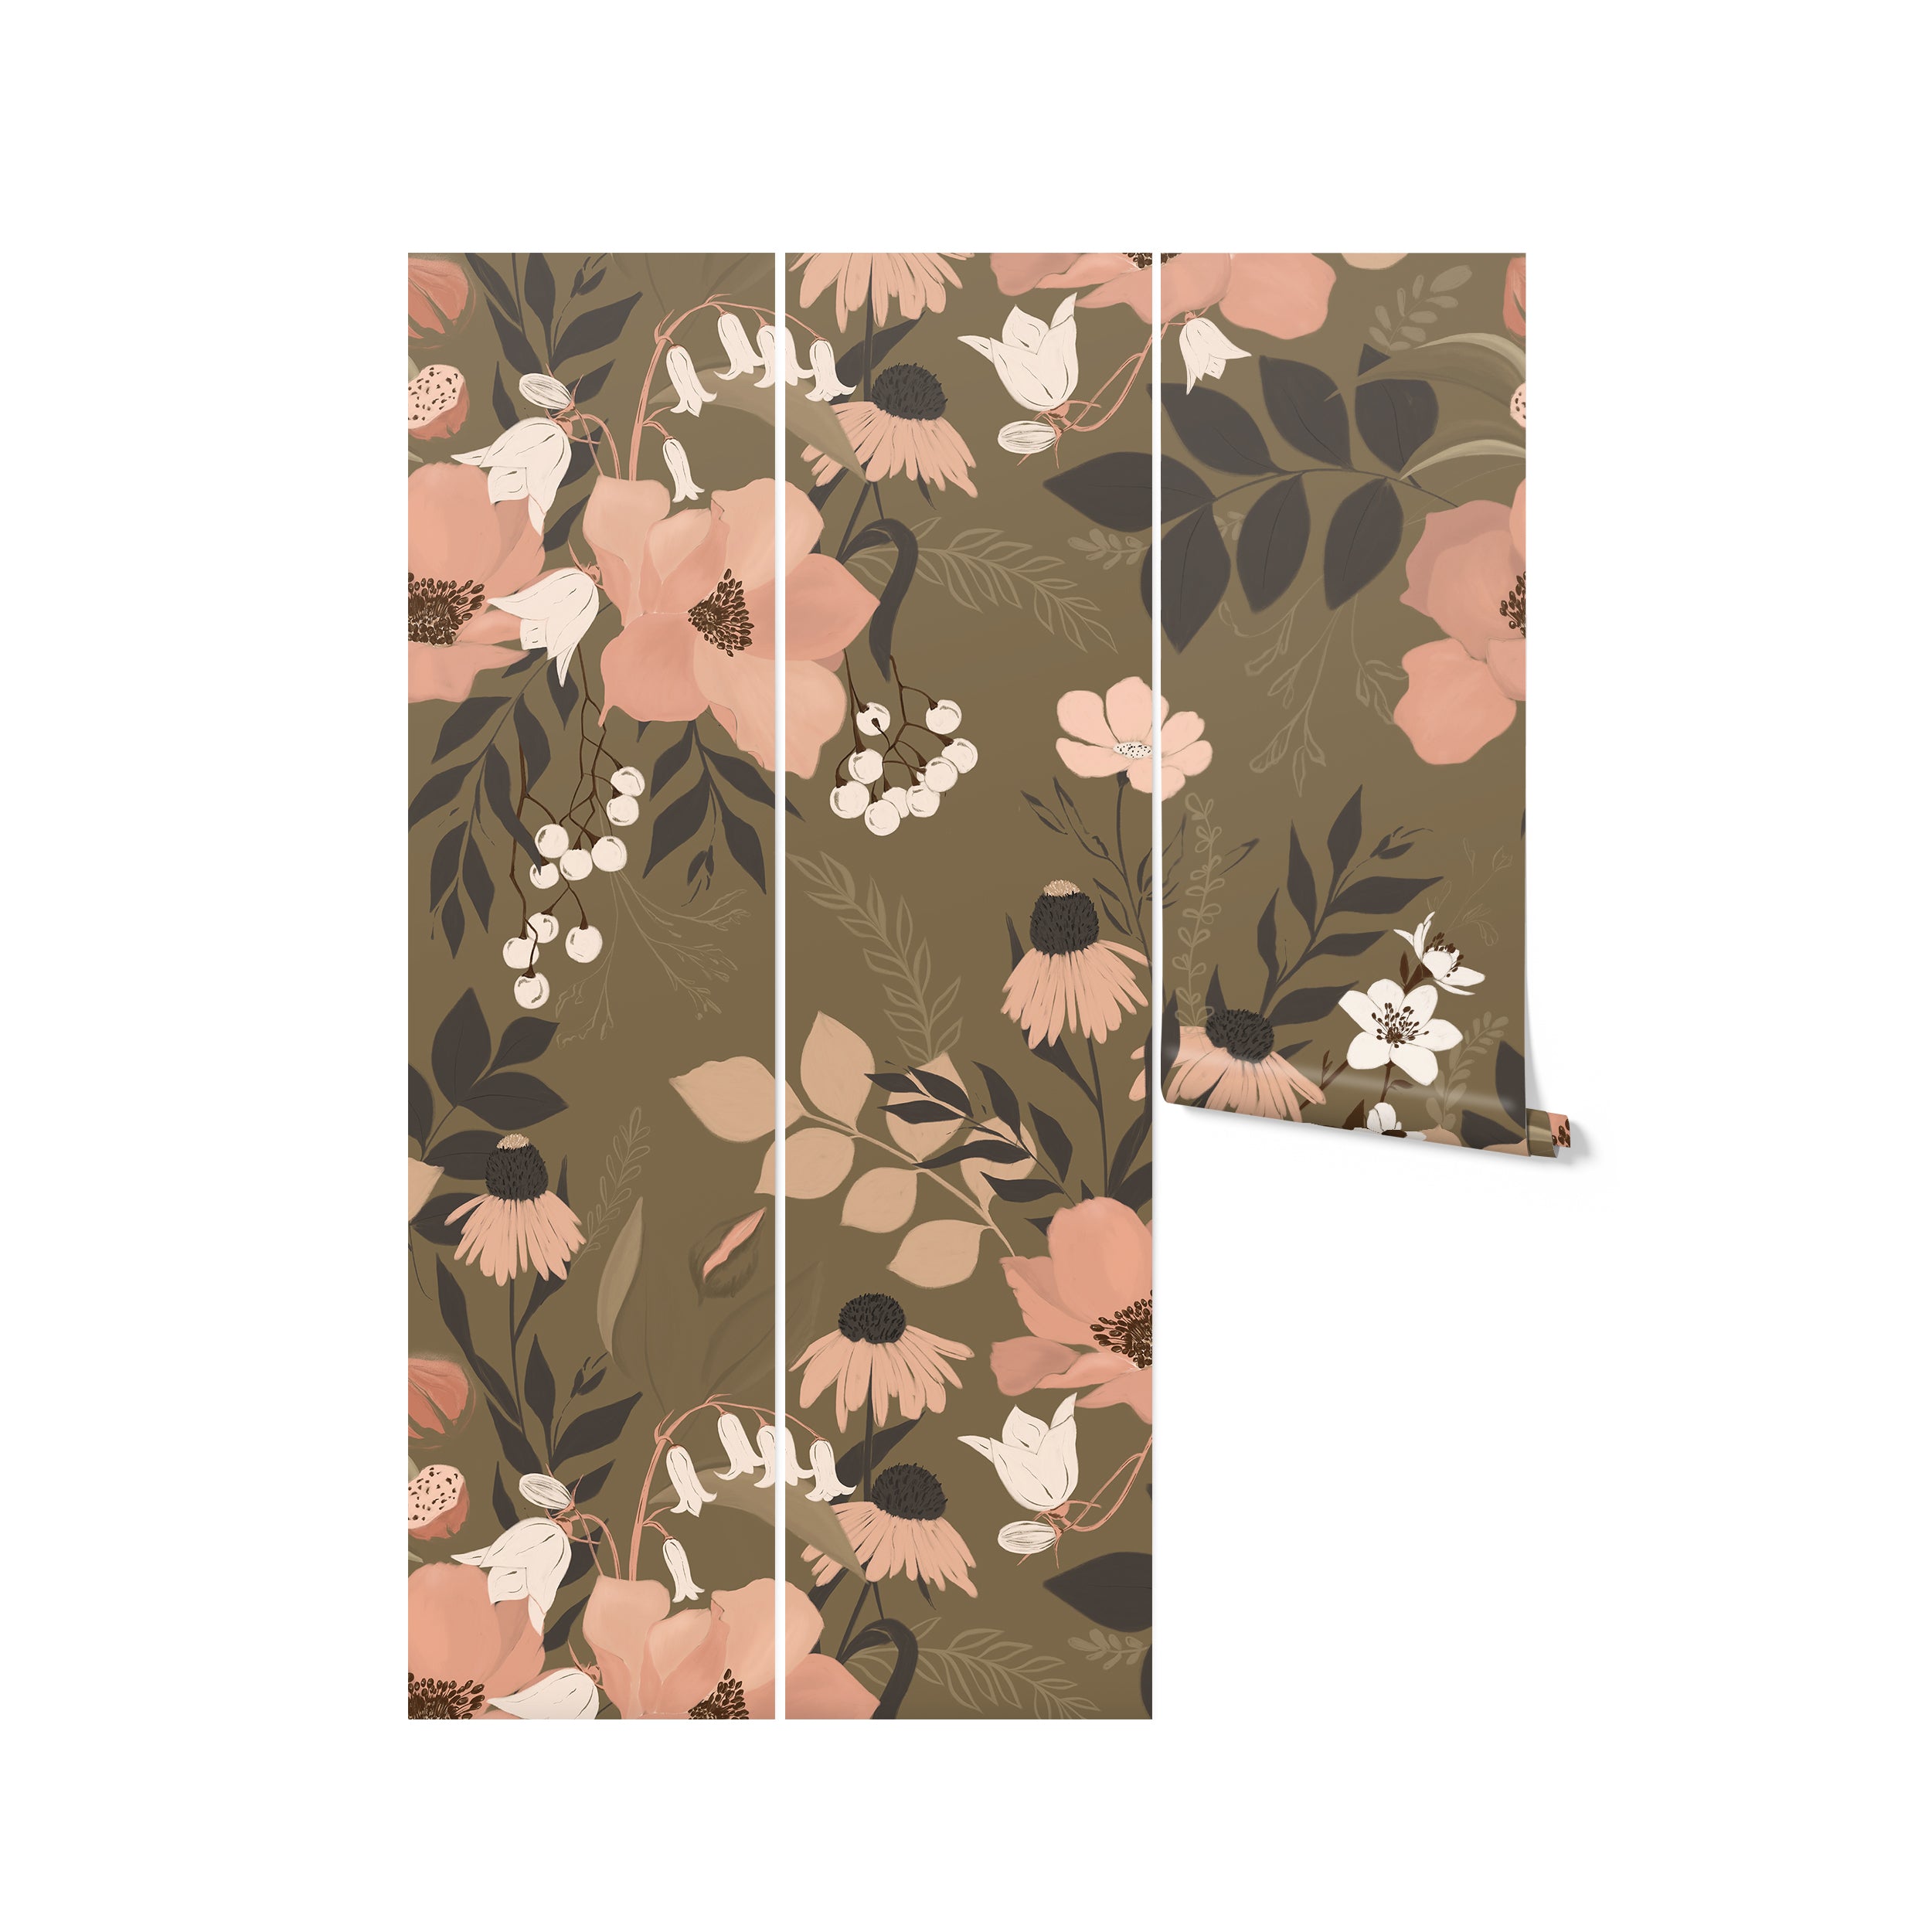 A rolled-up sample of the Botanic Garden Wallpaper - 75", showcasing an elegant and lush floral design. The wallpaper features large peach flowers, smaller white blooms, and dark leaves, perfect for adding a touch of sophistication and natural beauty to any interior.